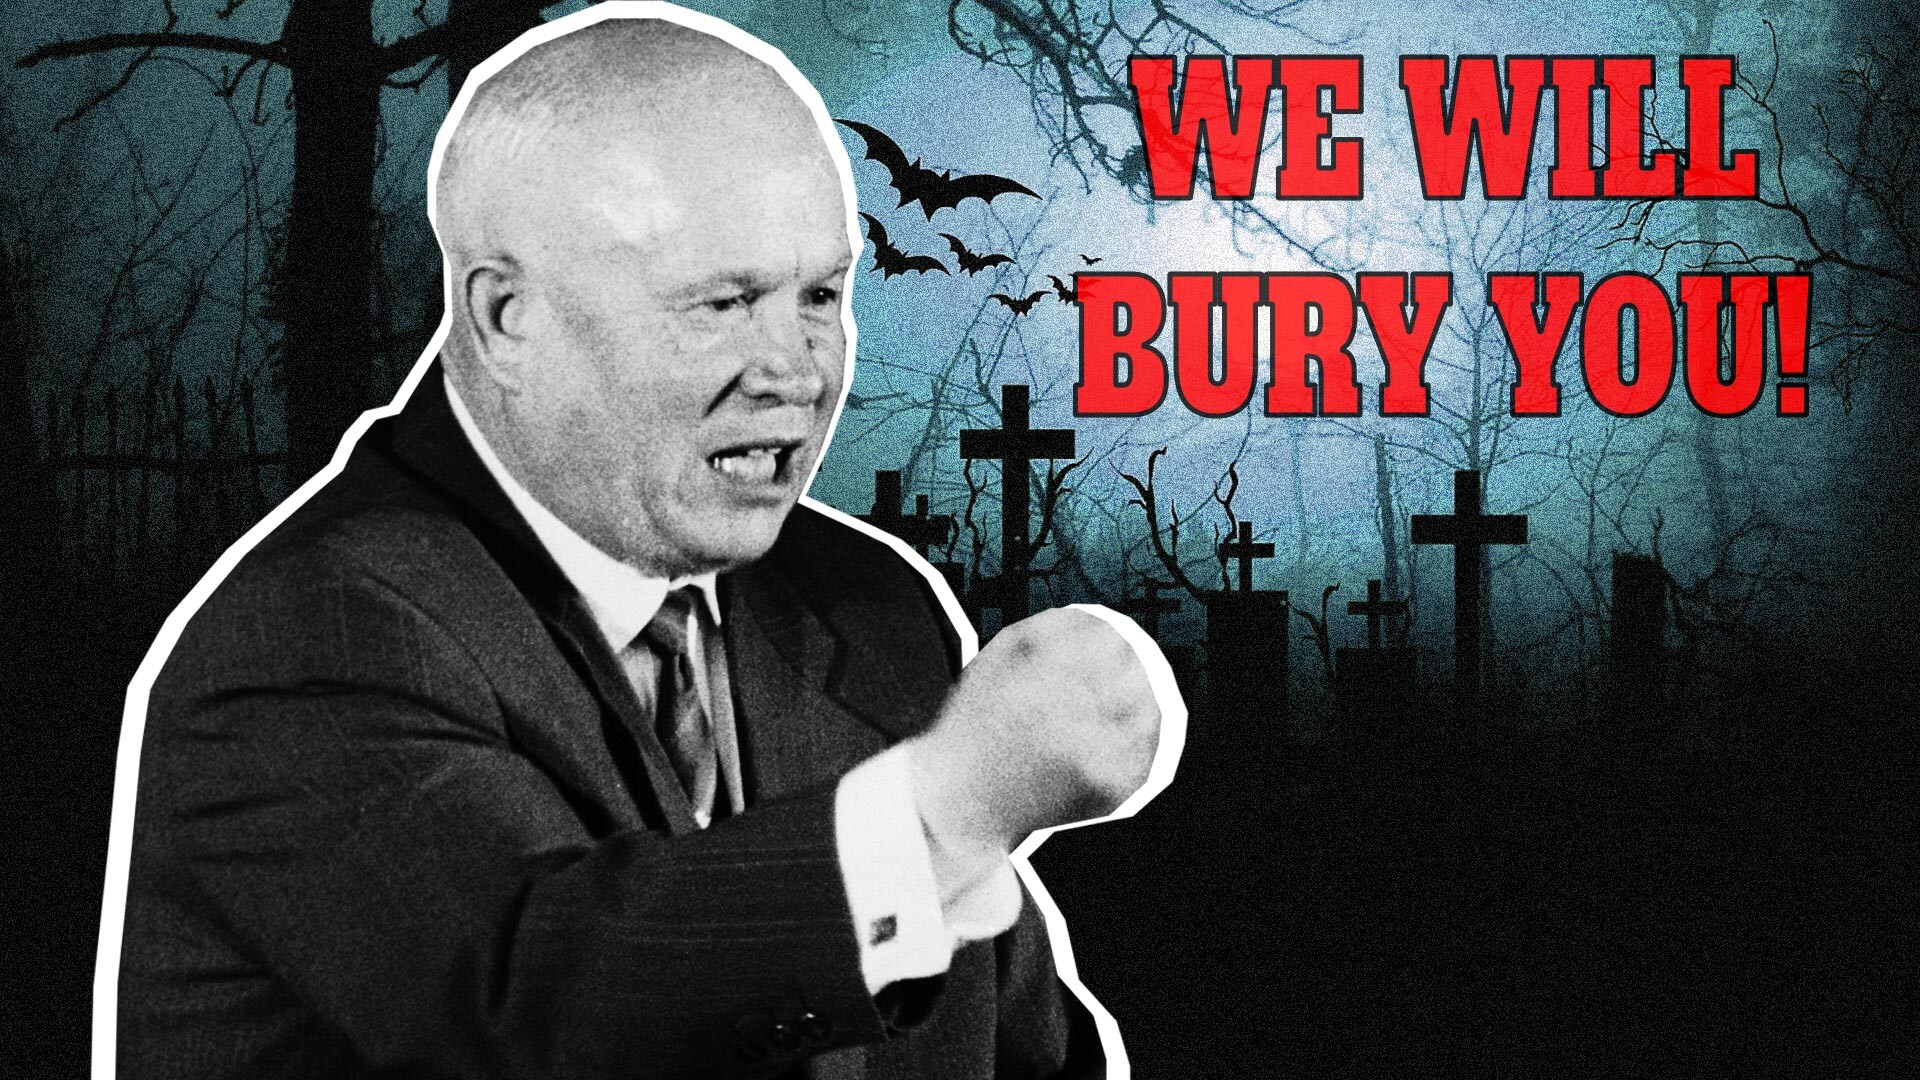 We will bury you': What Nikita Khrushchev actually meant - Russia Beyond